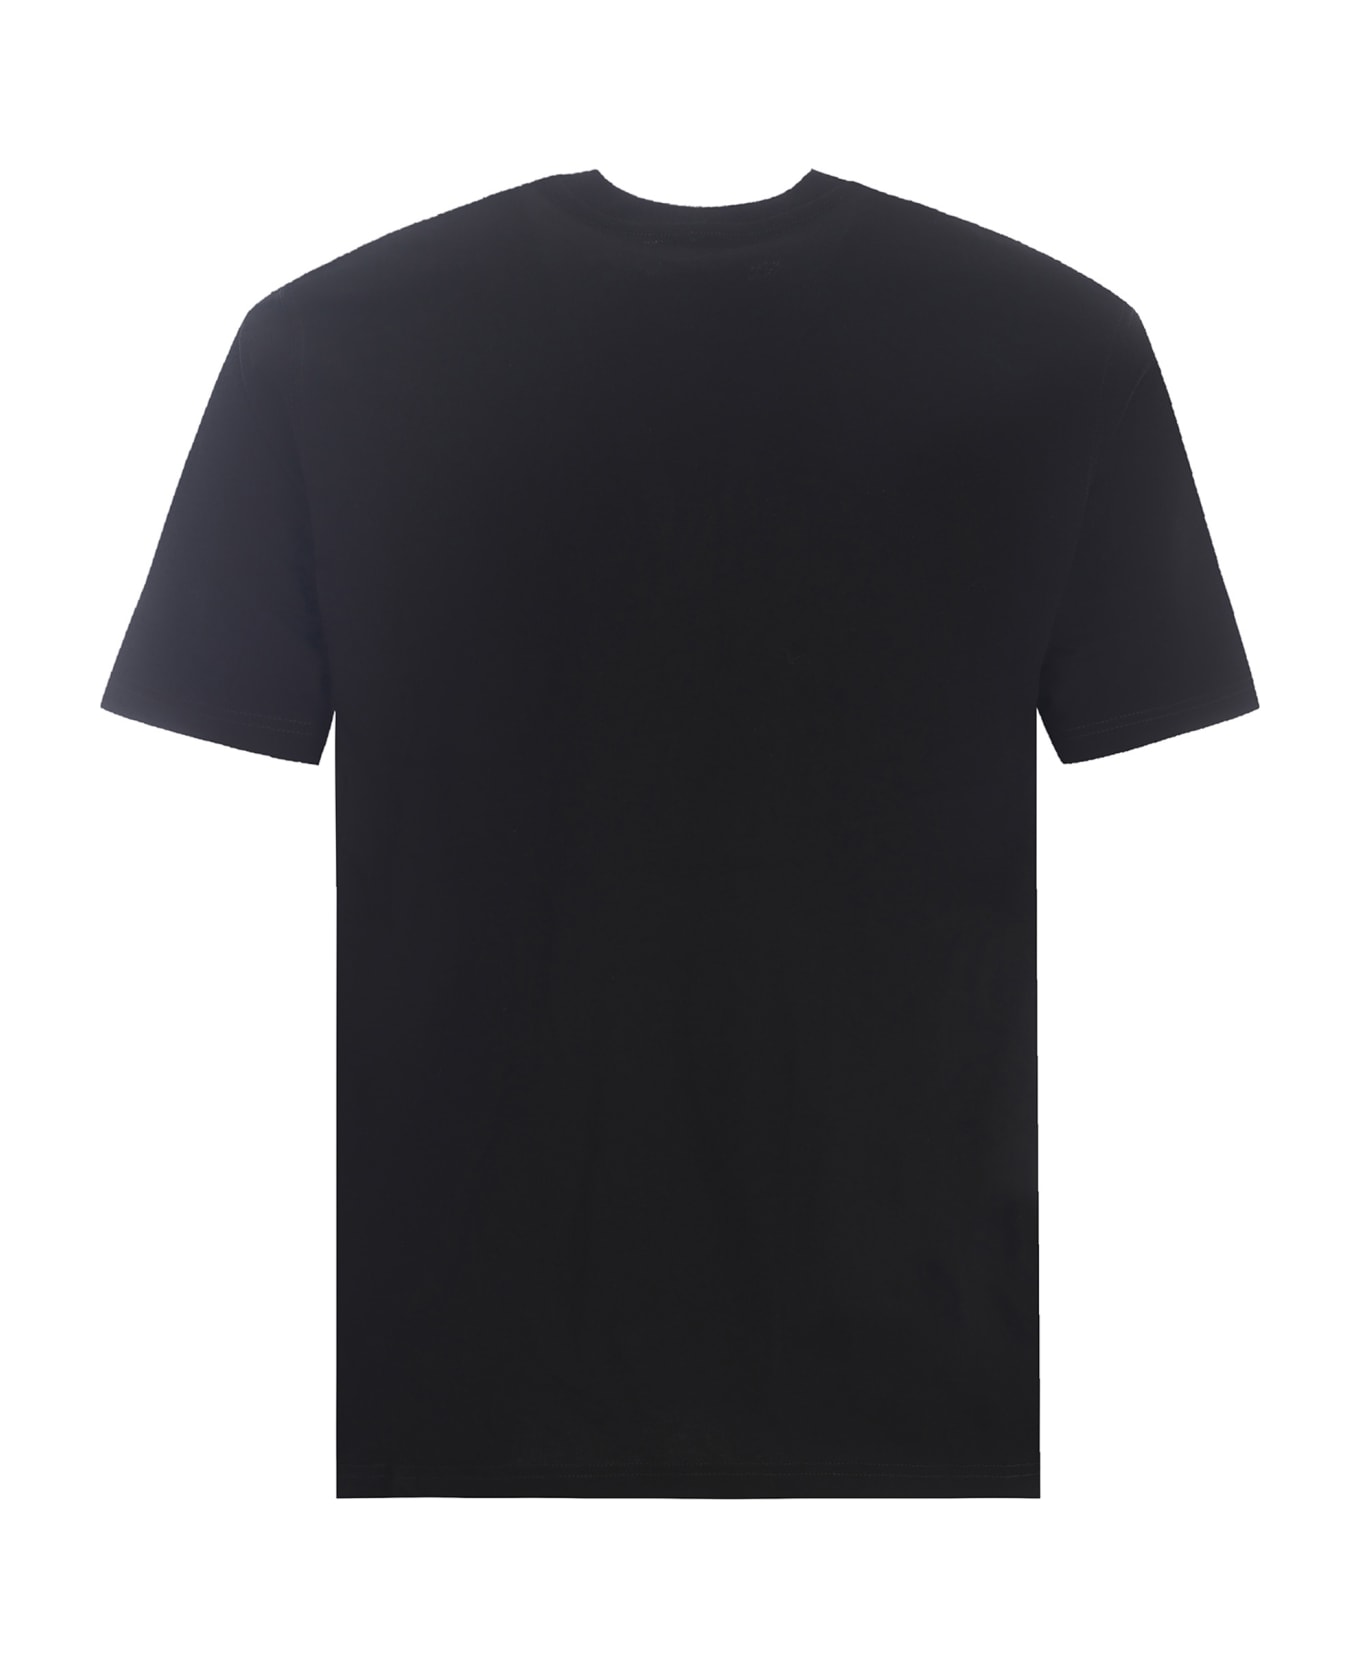 Diesel T-shirt Diesel "t-boxt" Made Of Cotton Jersey - Nero